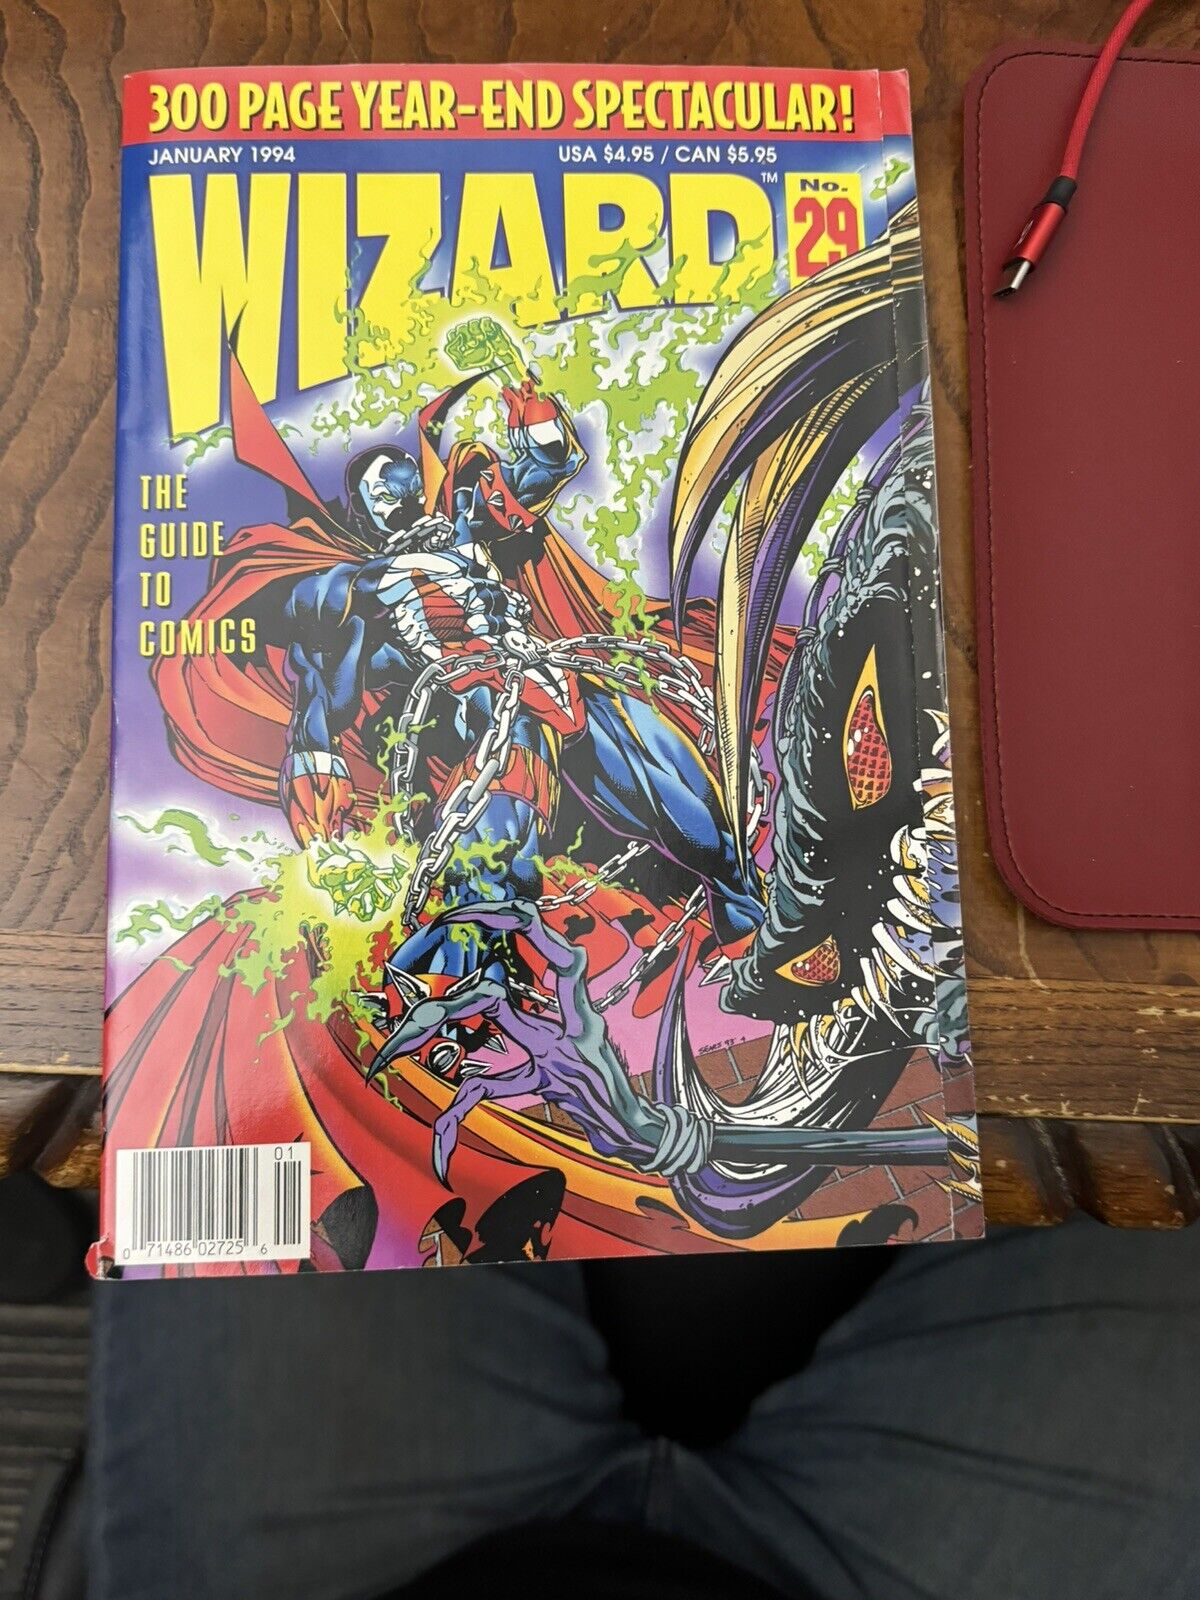 1994 Wizard January Edition 300 Page Year End Guide To Comics Magazine VTG 90s